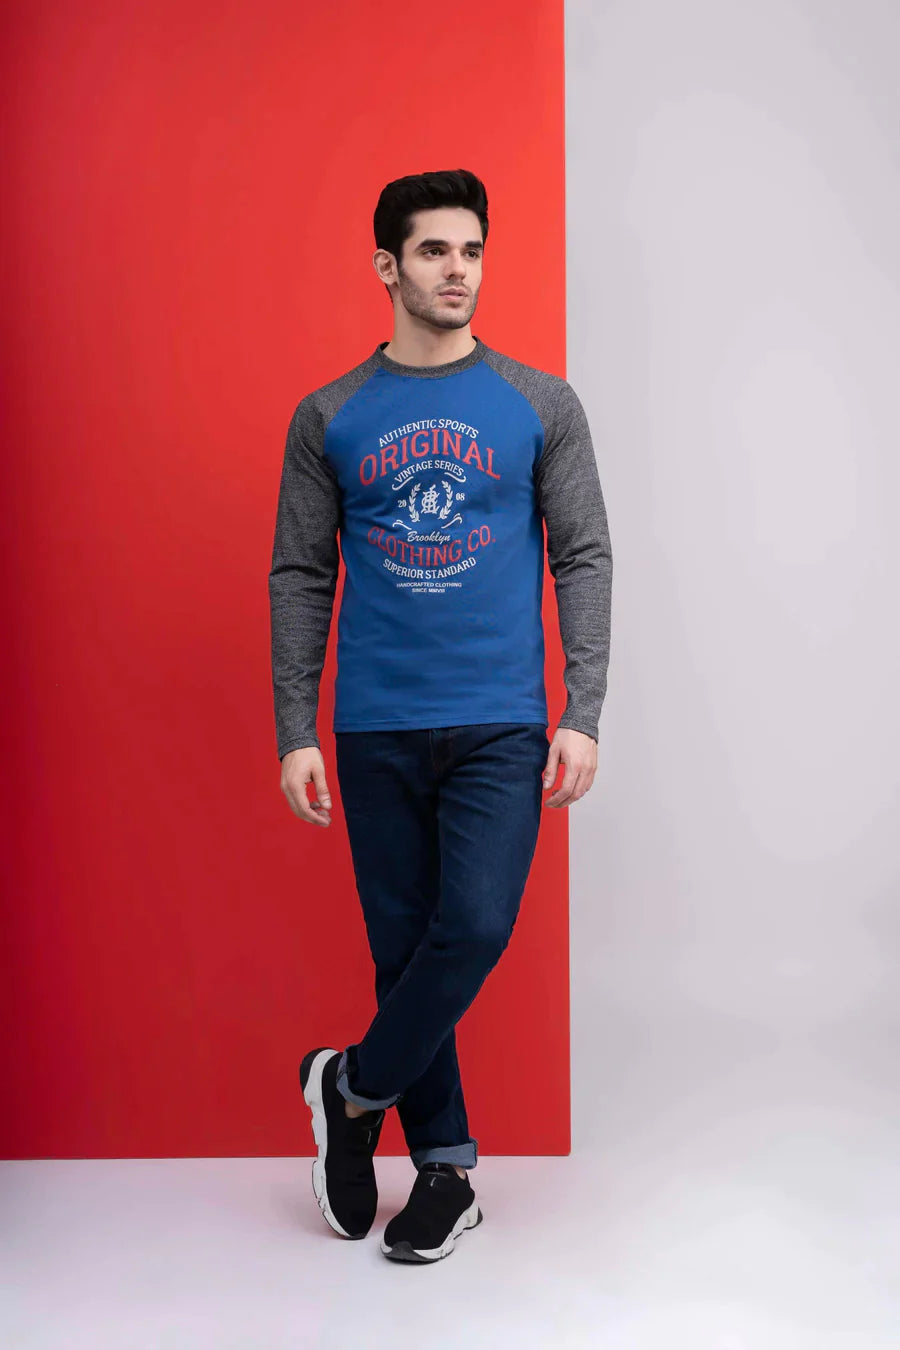 Full Sleeve T-Shirts For Men at Charcoal Clothing